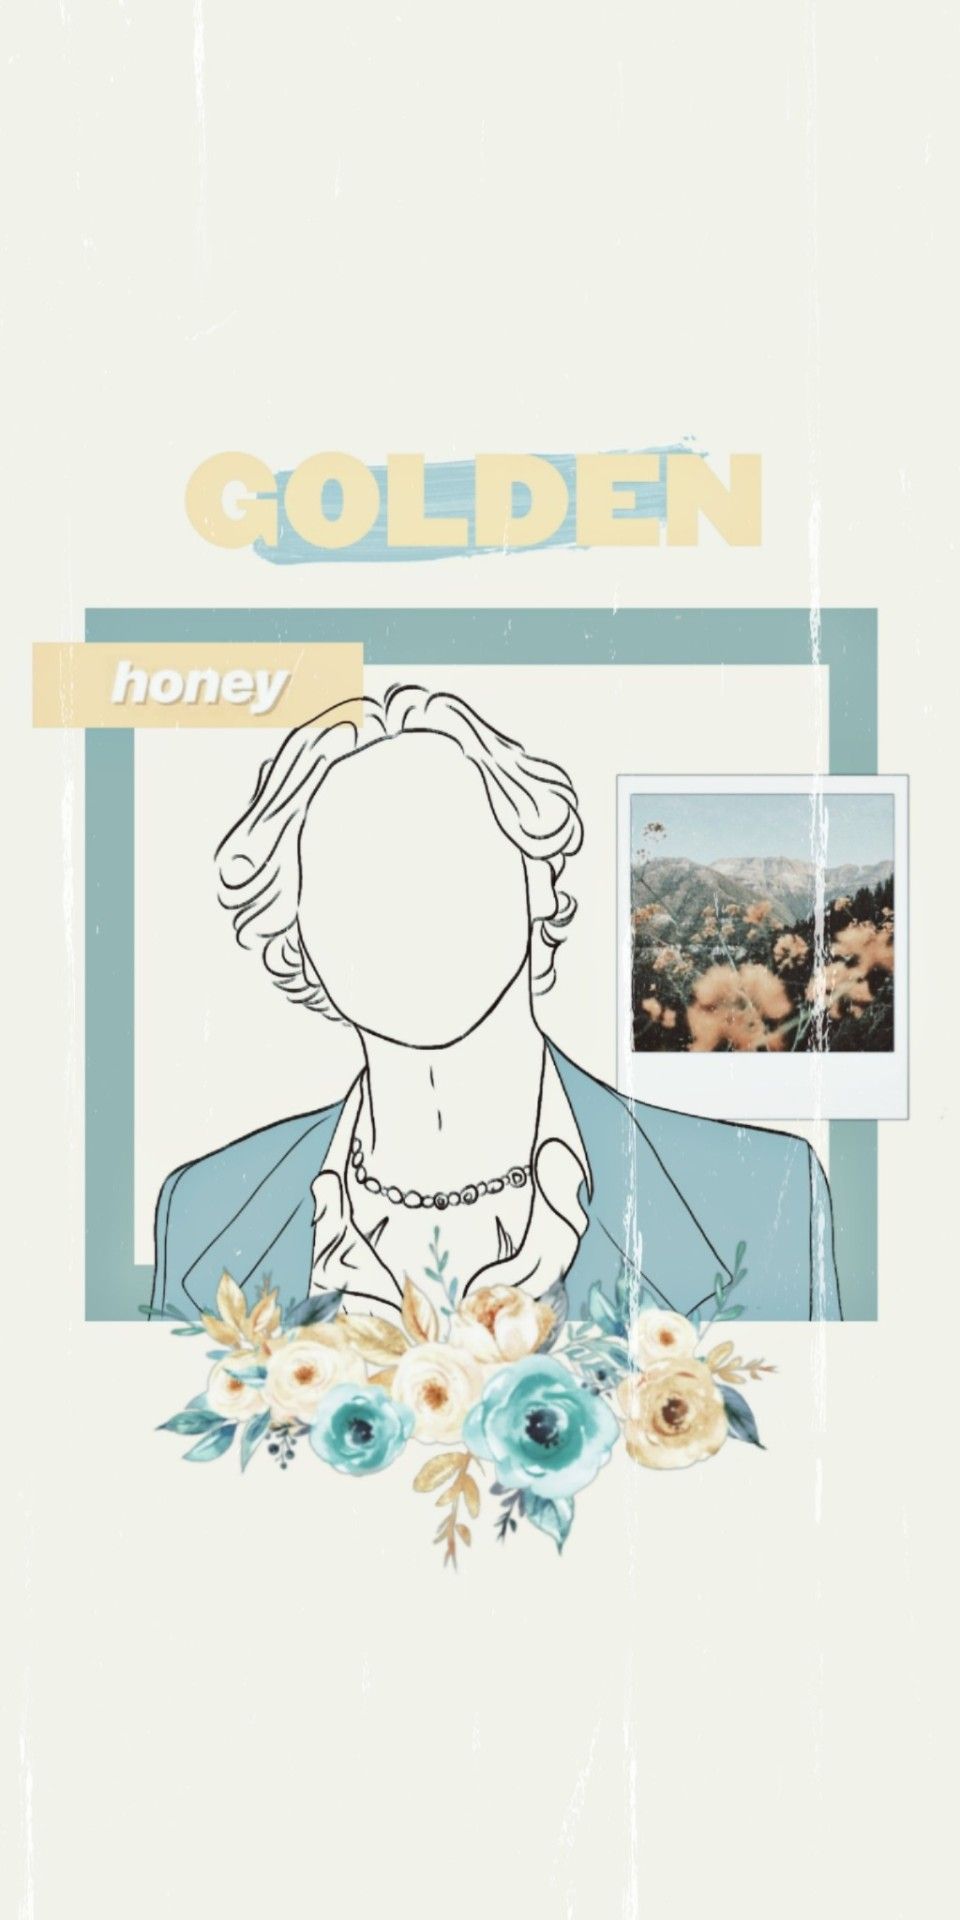 Harry Styles Golden aesthetic wallpaper with polaroid pictures of Harry and flowers. - Harry Styles